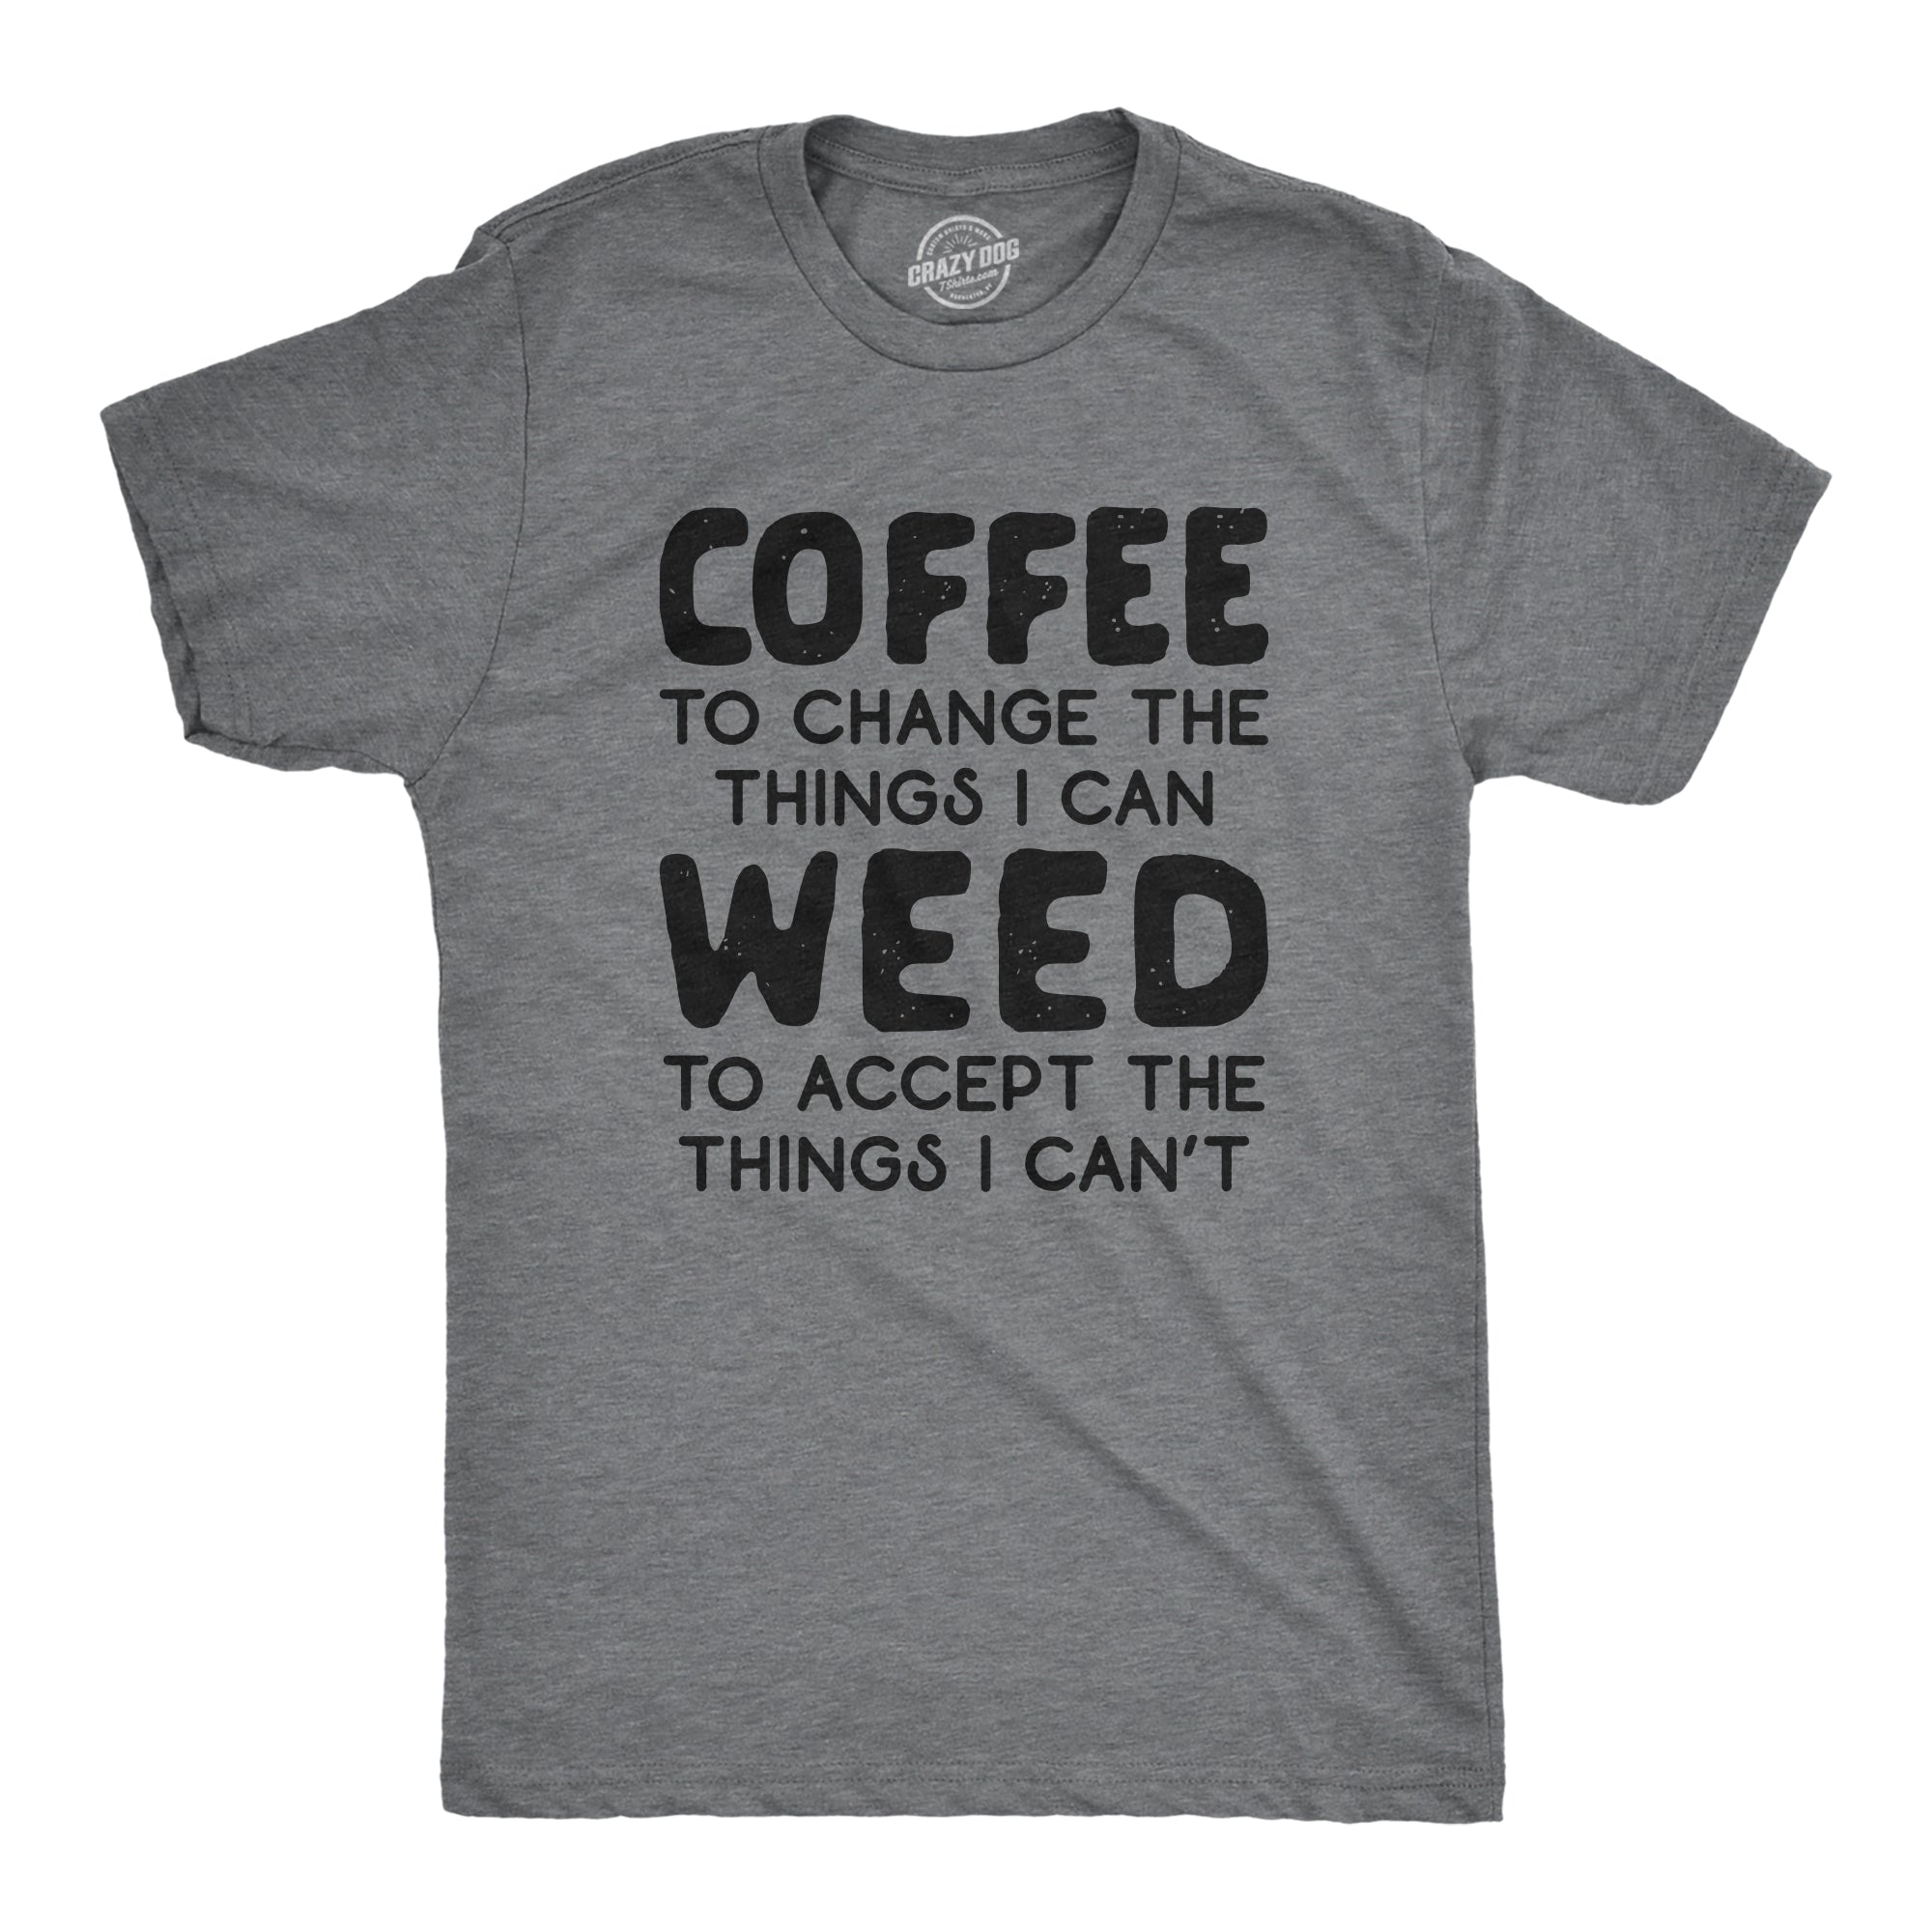 Funny Dark Heather Grey Coffee To Change The Things I Can Weed To Accept The Things I Can't Mens T Shirt Nerdy 420 Coffee Tee